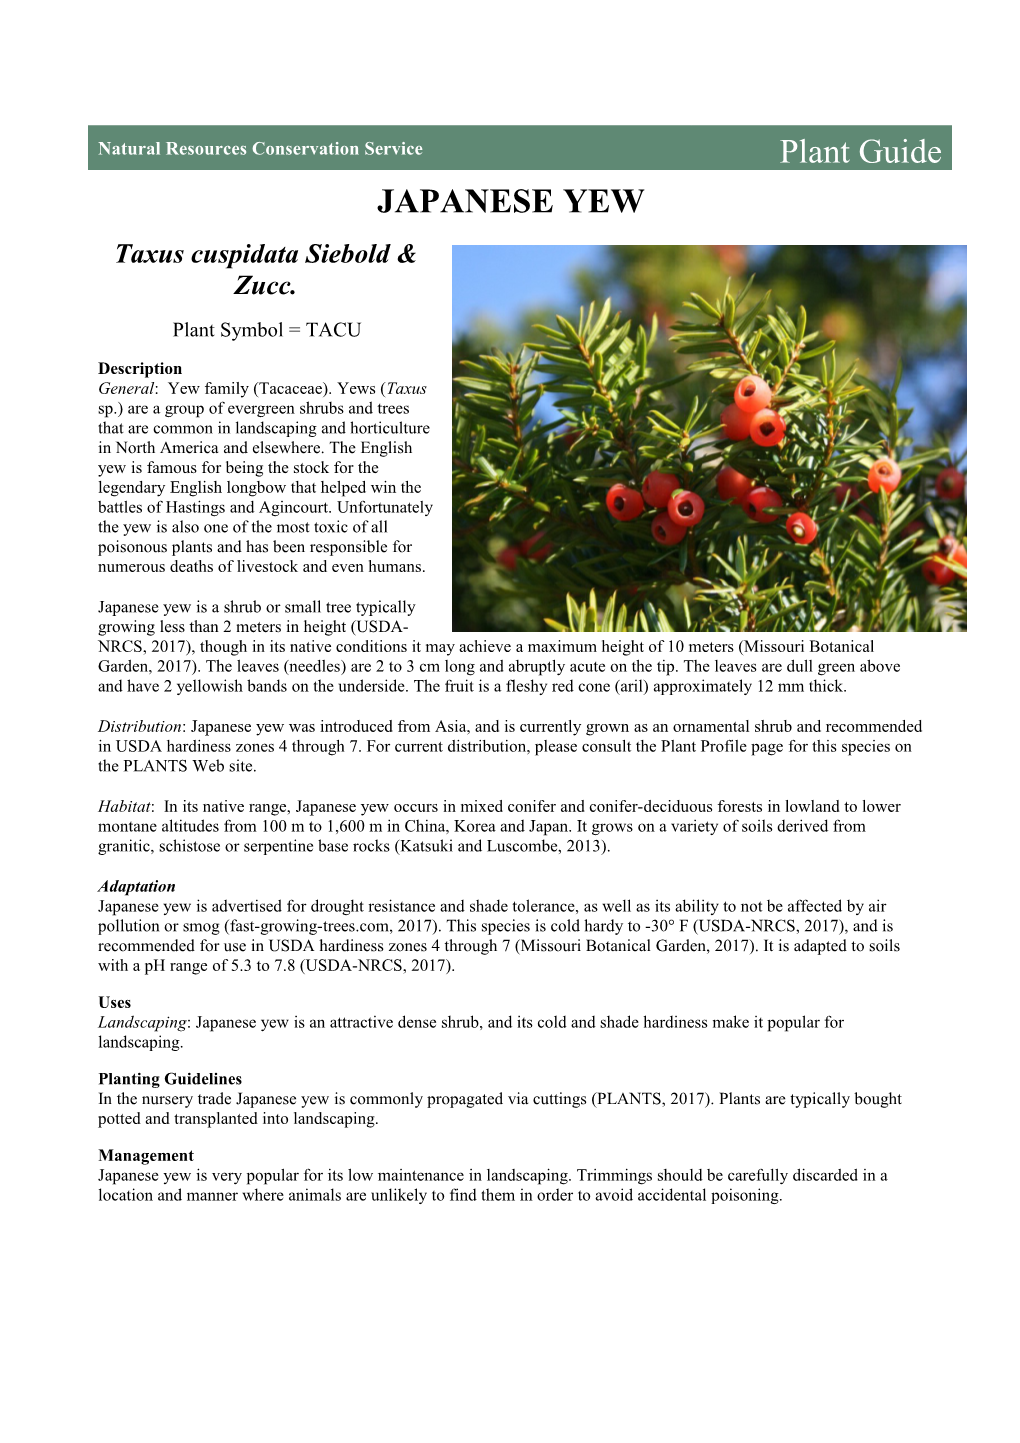 Plant Guide for Japanese Yew (Taxus Cuspidata)